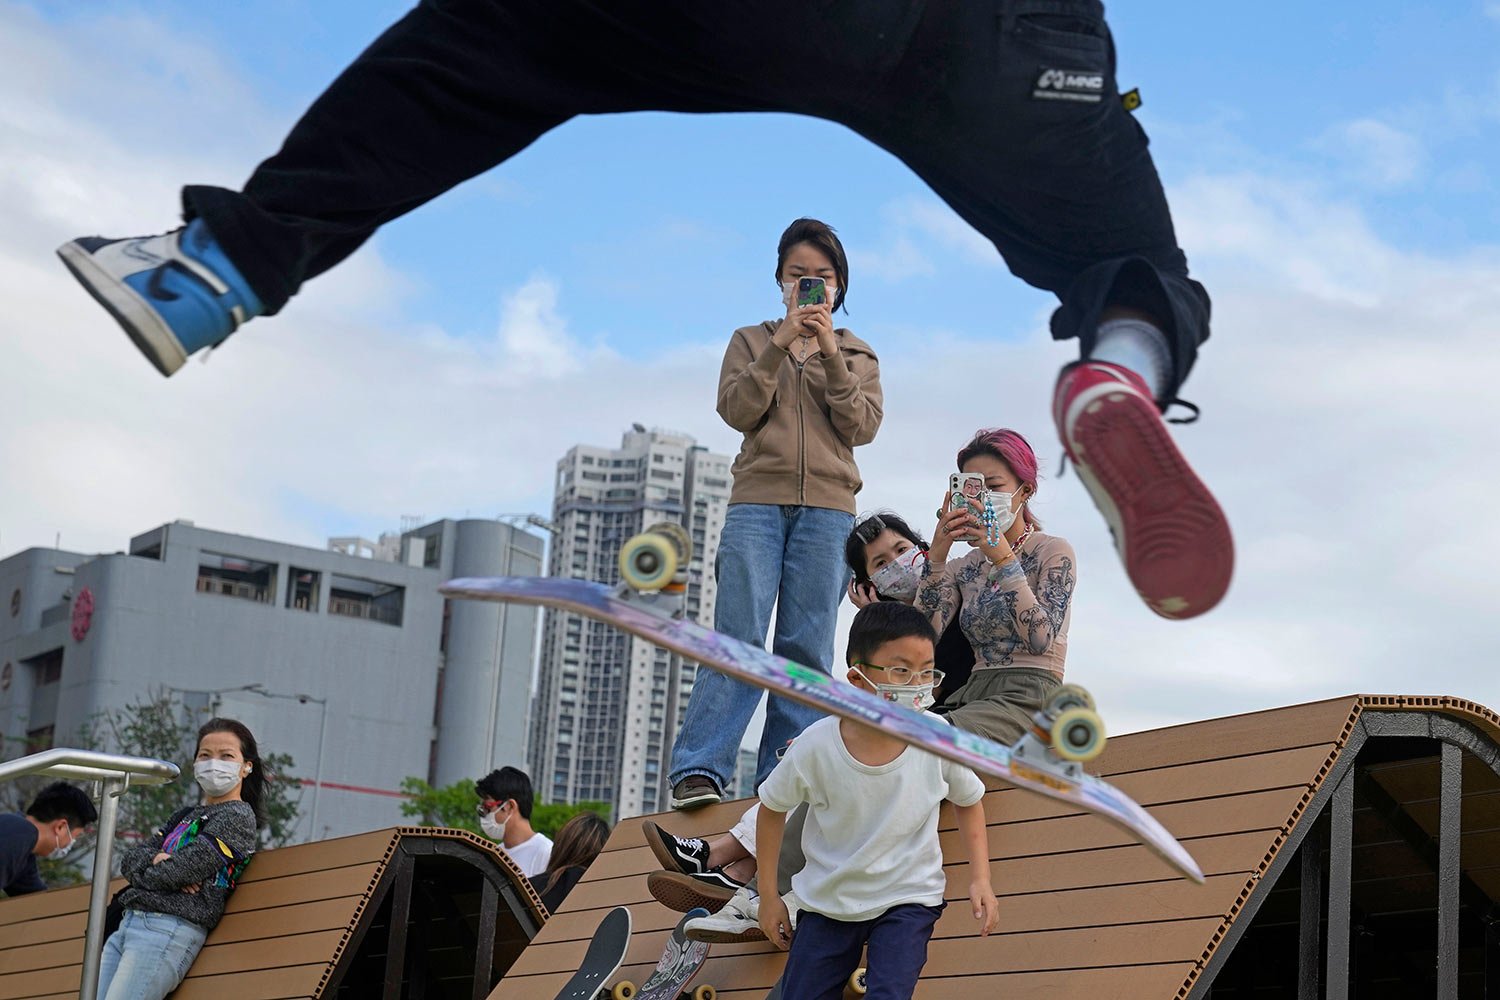  Kids wearing face masks to help protect from the coronavirus watch a teenager flipping his skateboard in an "ollie" at a park in Hong Kong, Wednesday, March 30, 2022. (AP Photo/Kin Cheung) 